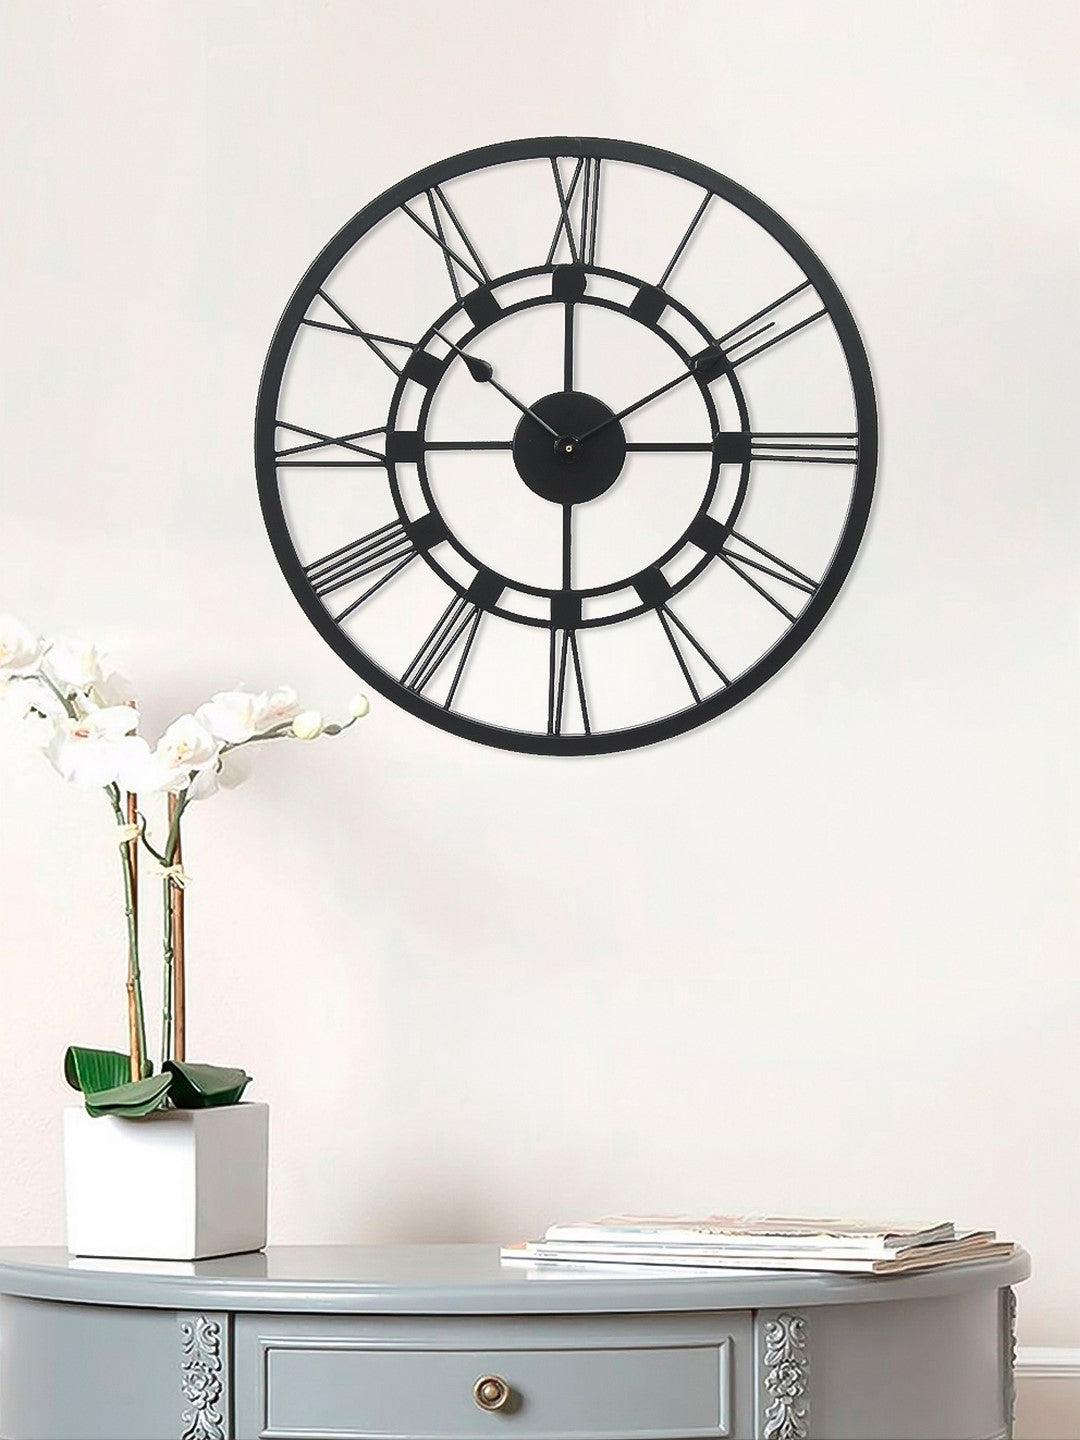 Black Iron Round Handcrafted Analog Roman Number Wall Clock Without Glass 2